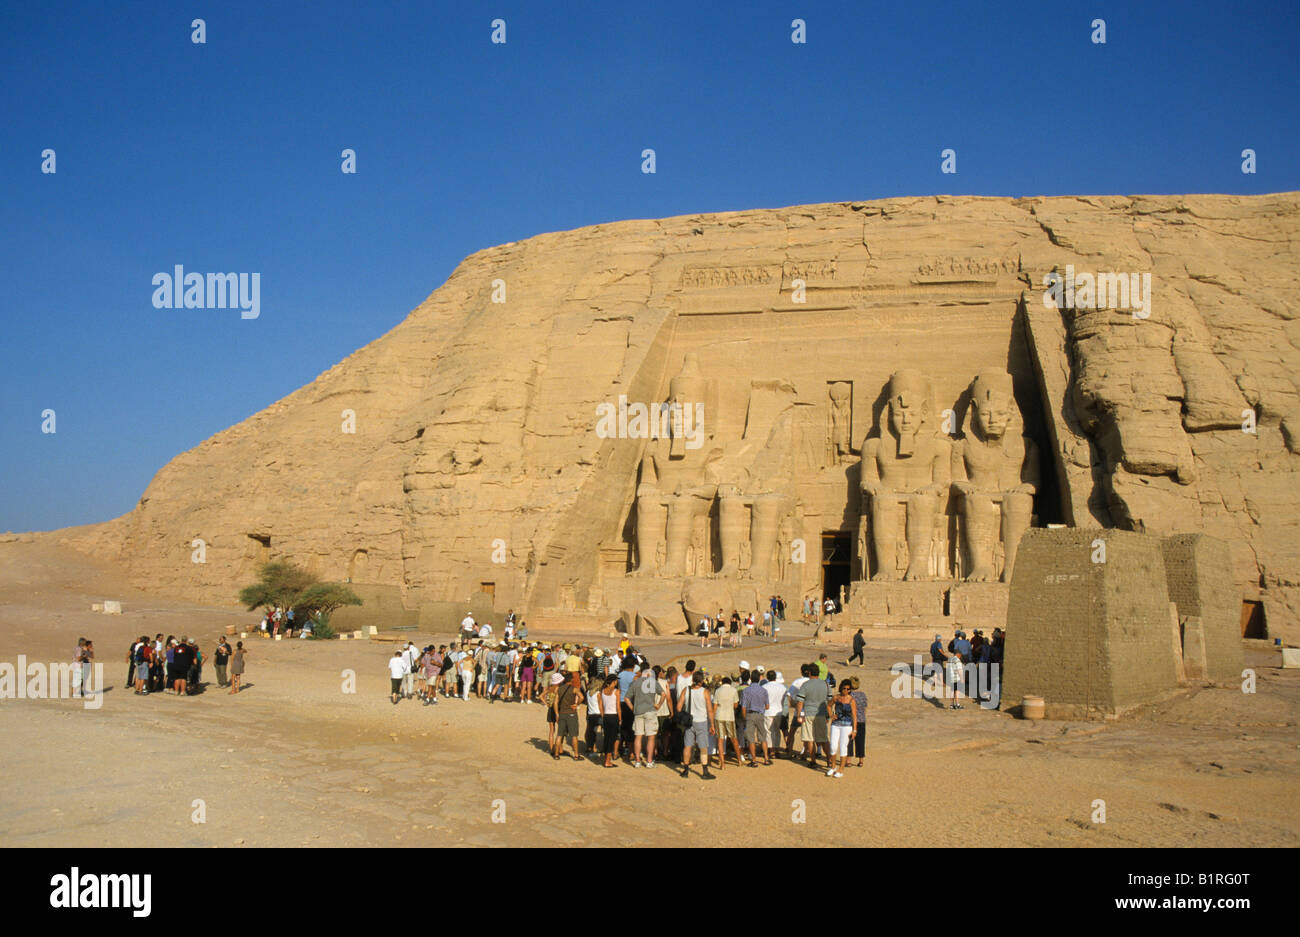 Tourists standing in front of the Great Temple of Ramses II, Abu Simbel, Egypt, Africa Stock Photo